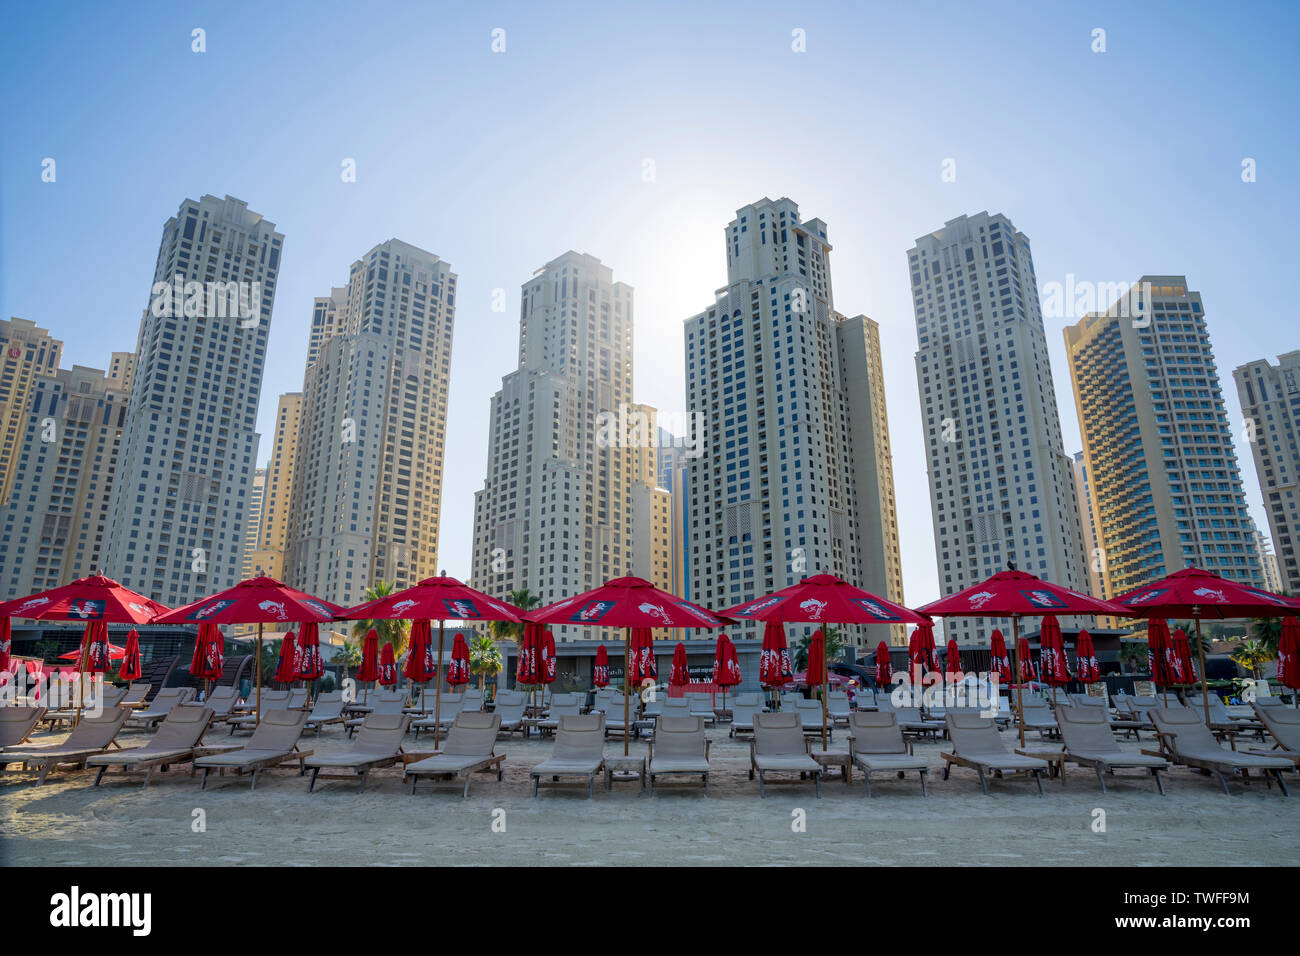 Residential Towers Rise Over Rows Of Beach Chairs At Jumeirah